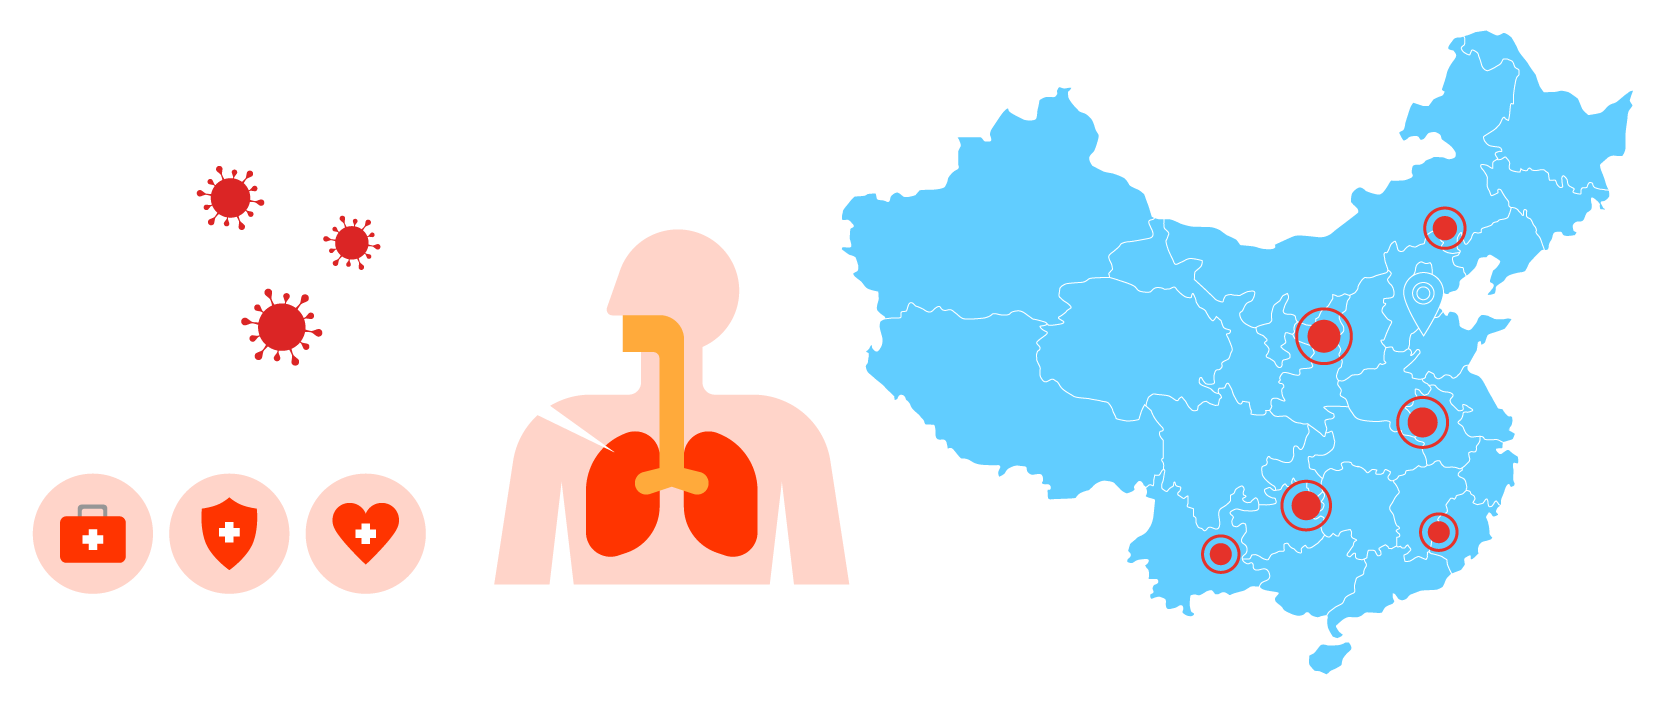 Comprehensive survey at all business sites in China to assess employee health and degree of infection.